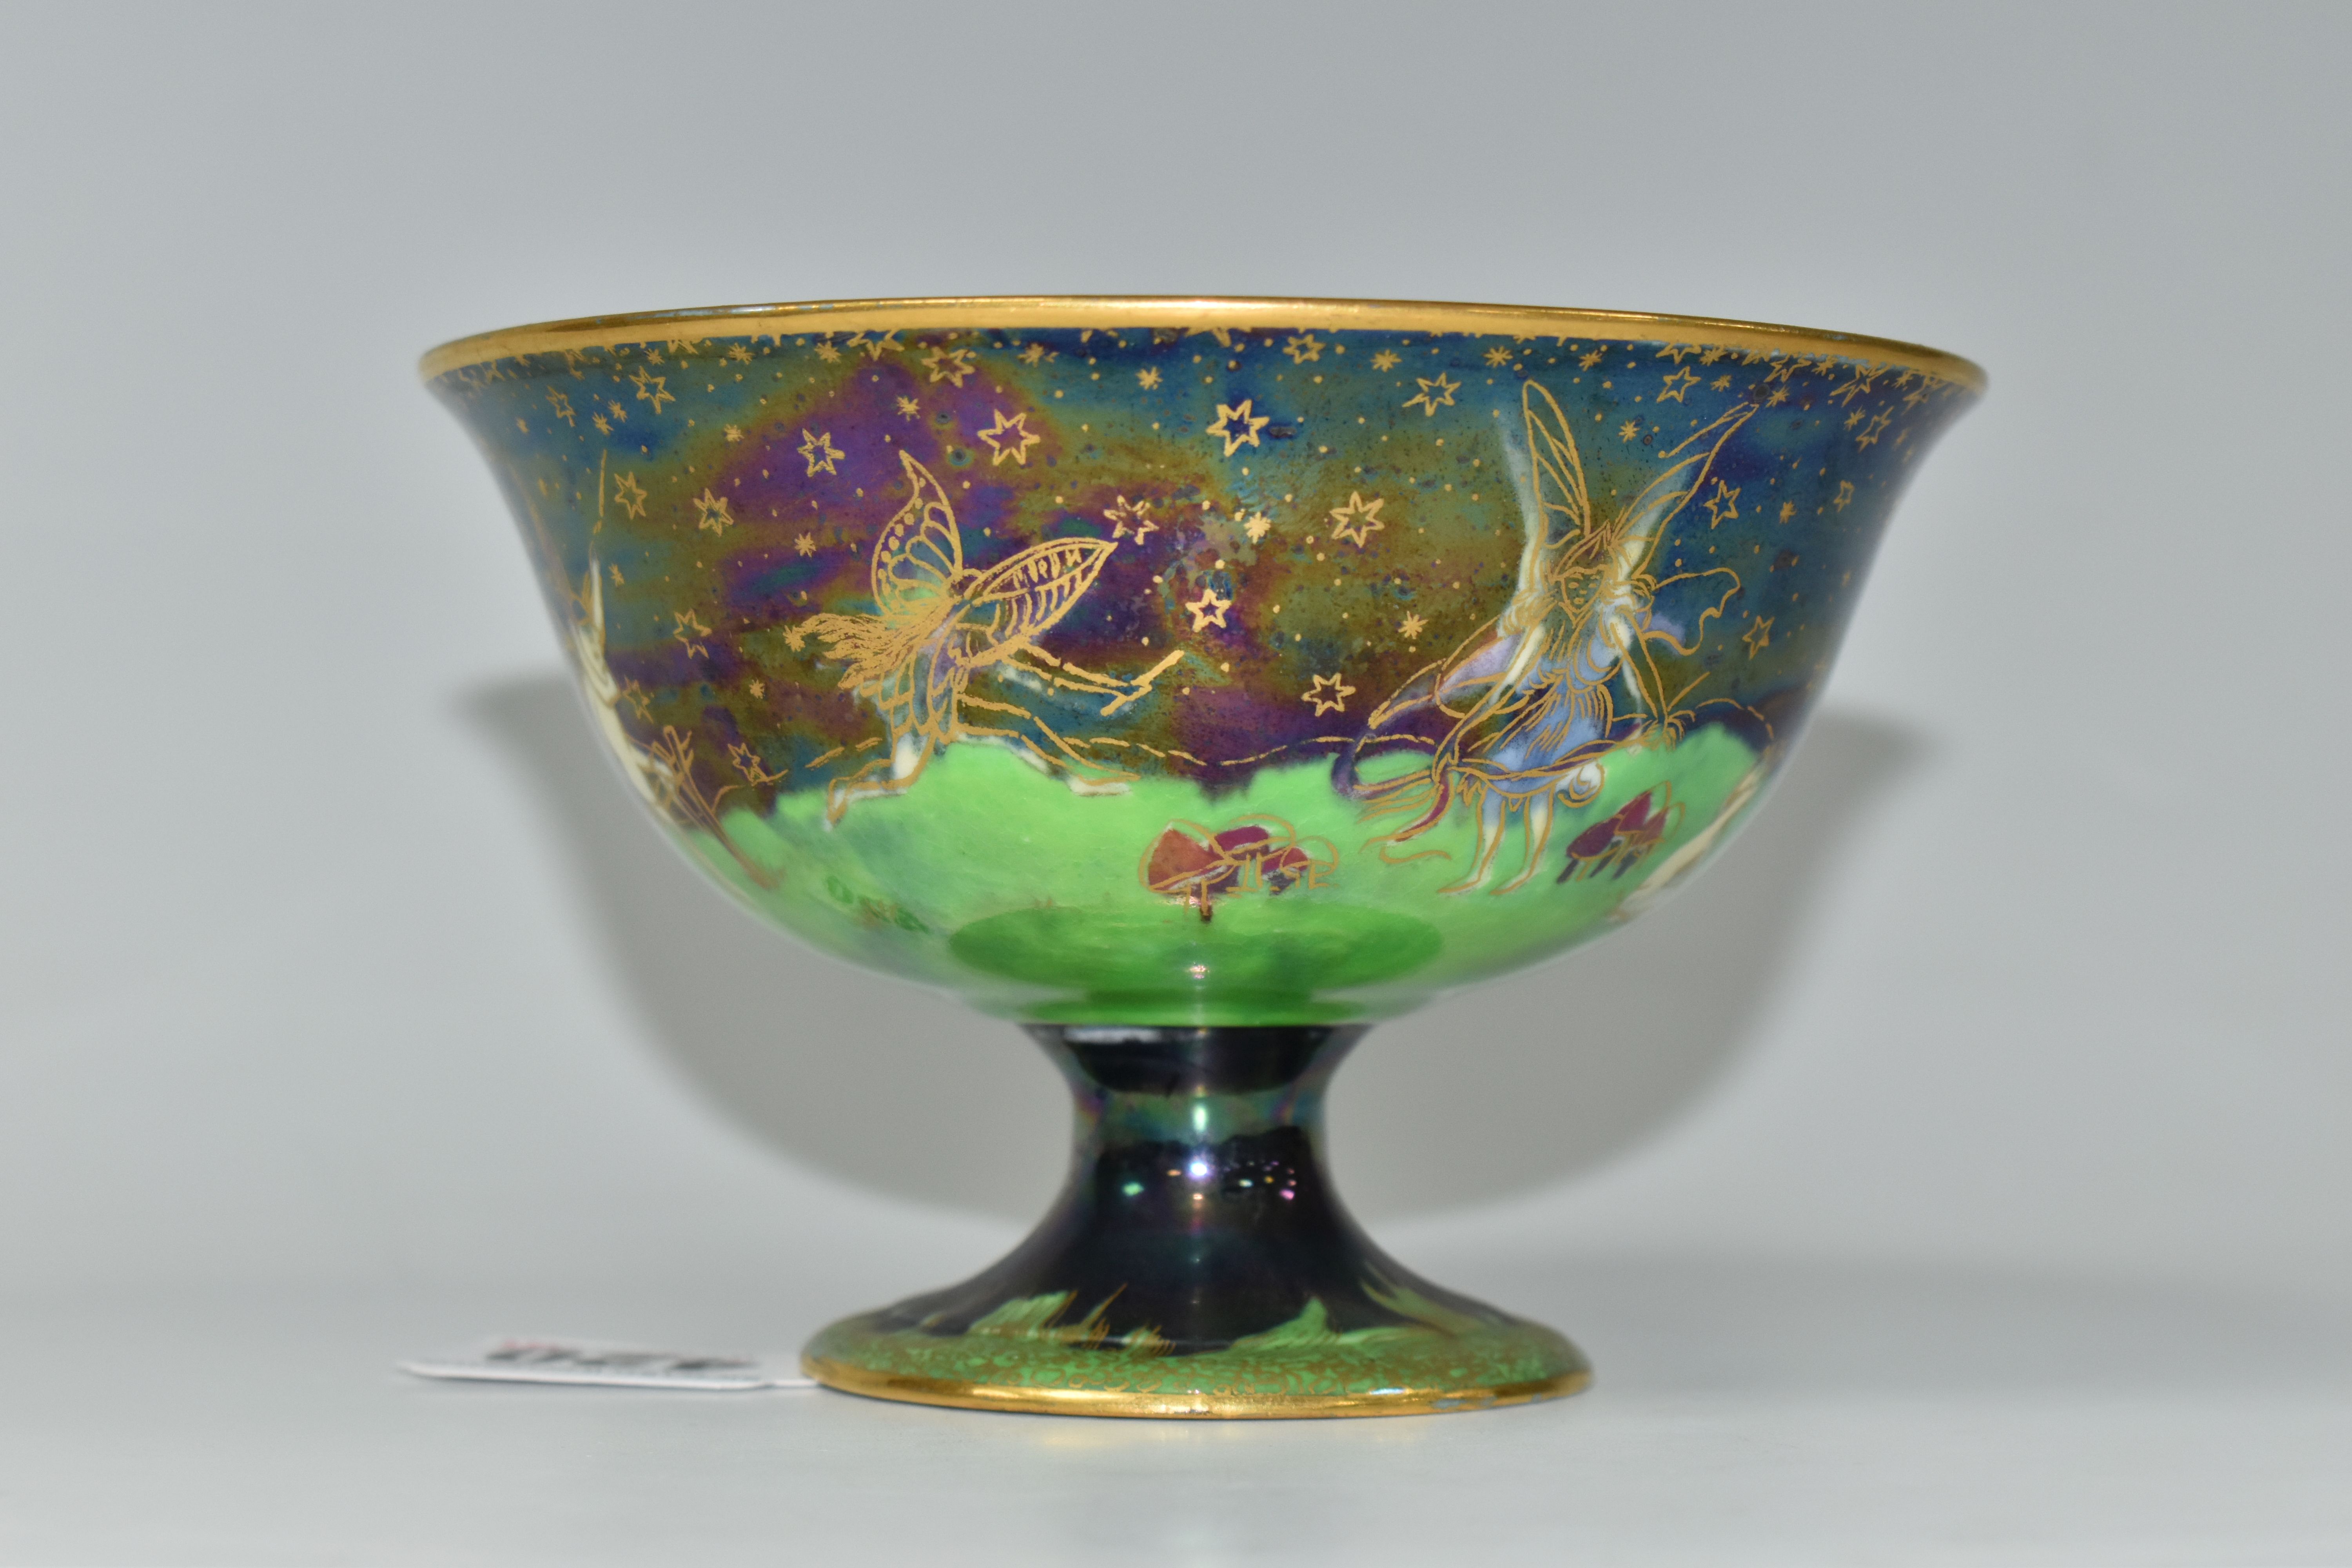 A WEDGWOOD FAIRYLAND LUSTRE FOOTED BOWL, decorated with a mother of pearl lustre with fairies in - Image 3 of 9